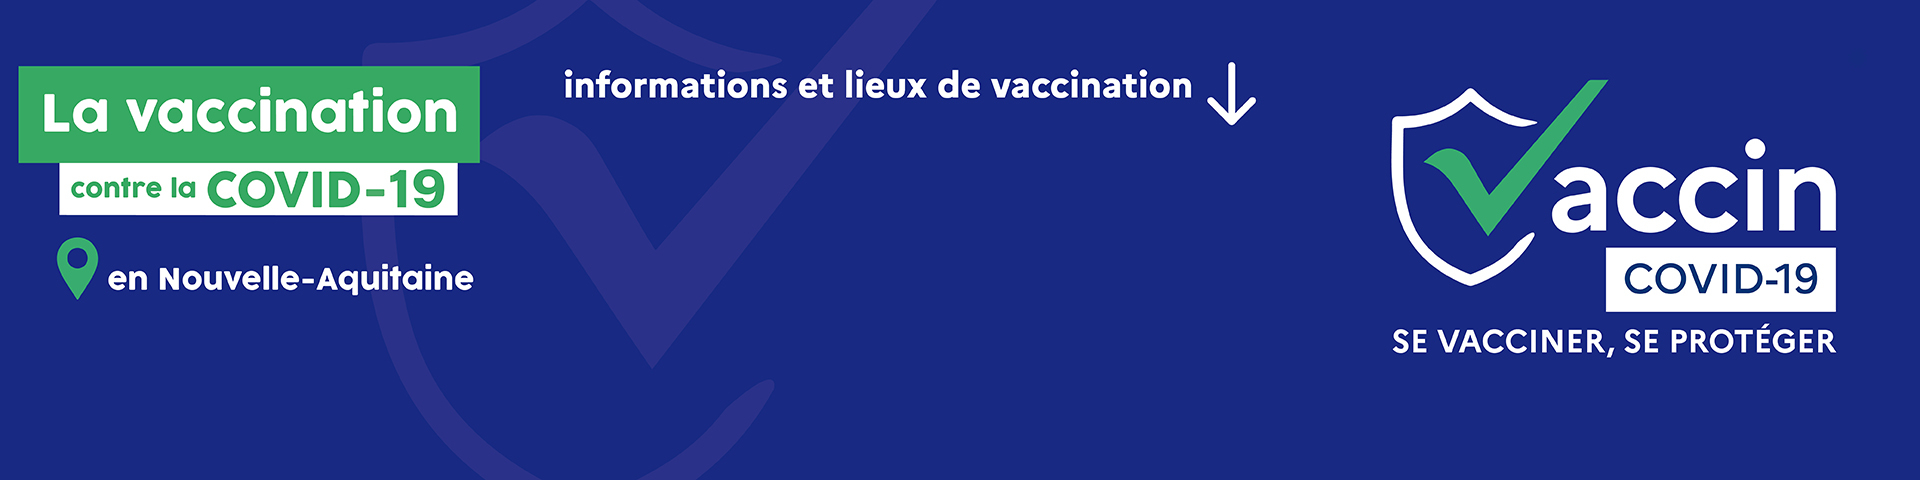 Bandeau Site Agence Vaccination COVID-19 